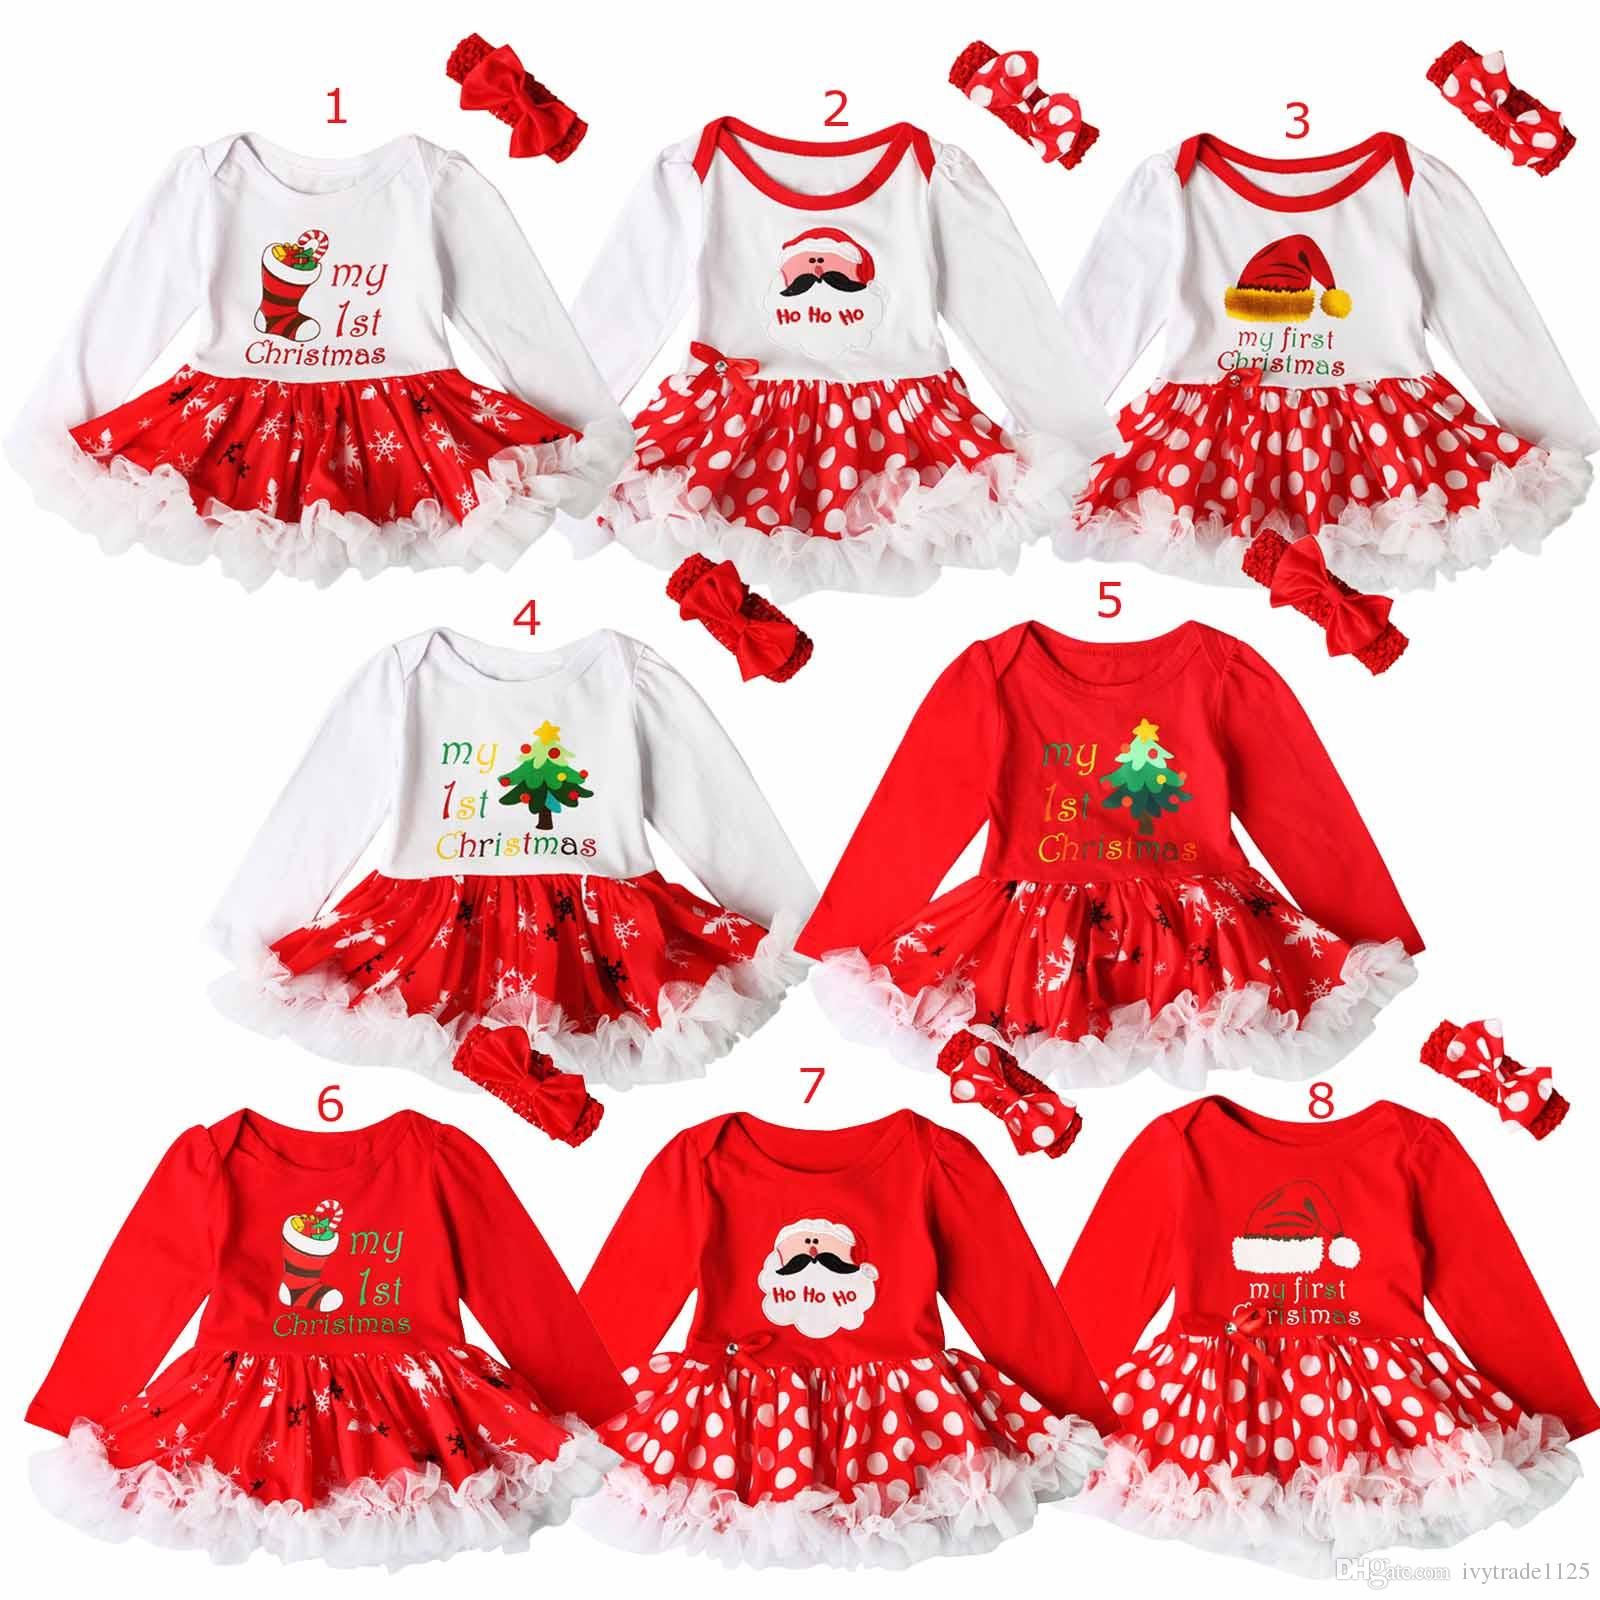 2018 Hot Christmas Party Baby Girl Romper Set Christmas Santa Hat Boot Letter Print Design Long Sleeve Romper Tutu Dress Headband Two Piece Sets From